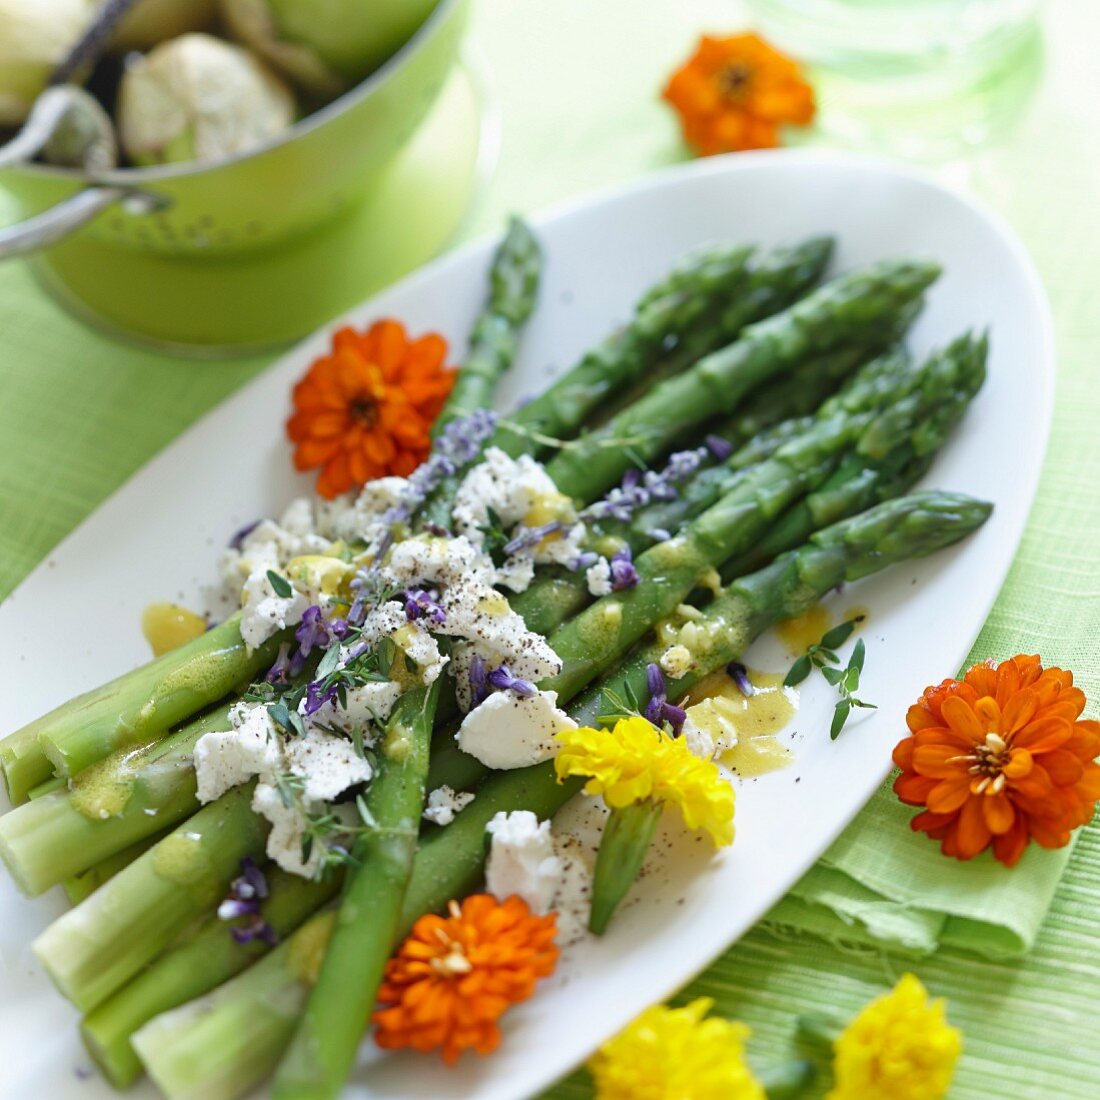 Green asparagus with cheese and edible flowers